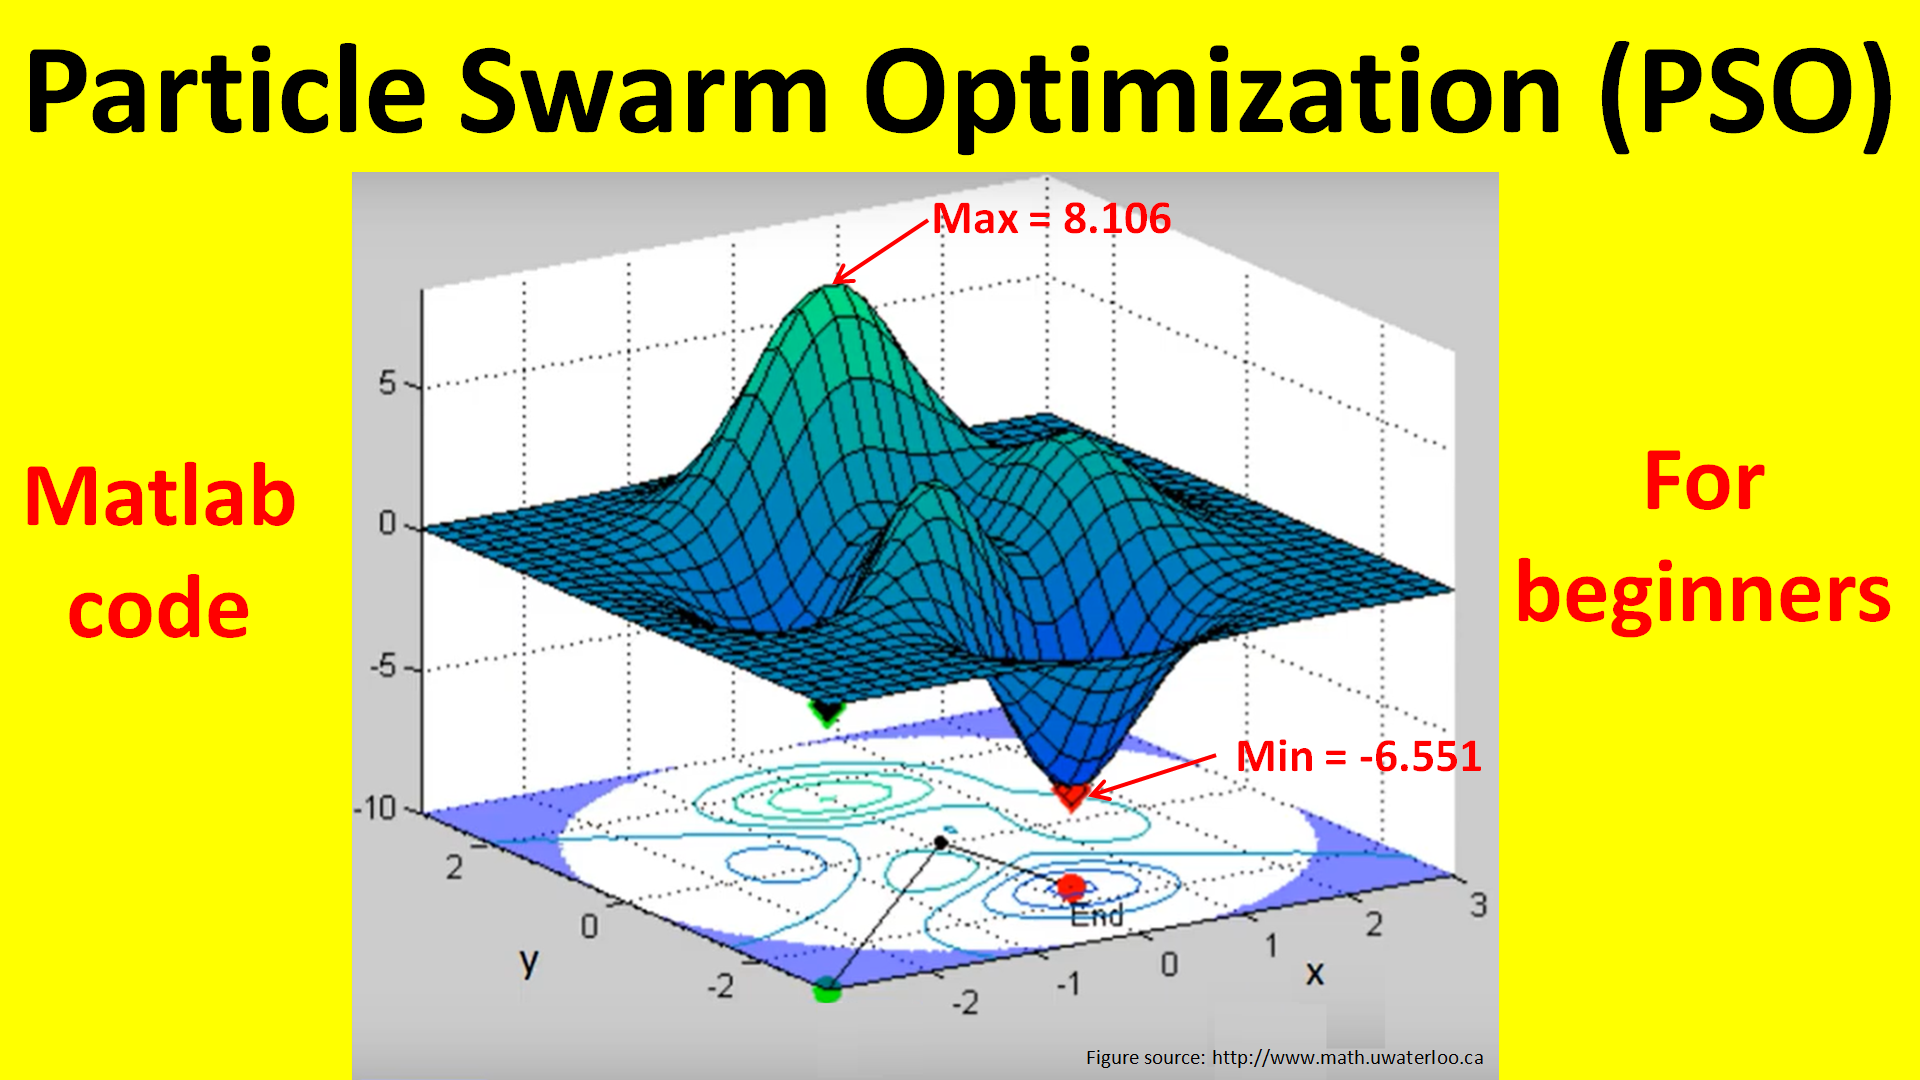 Matlab Code of Particle Swarm Optimization (PSO)